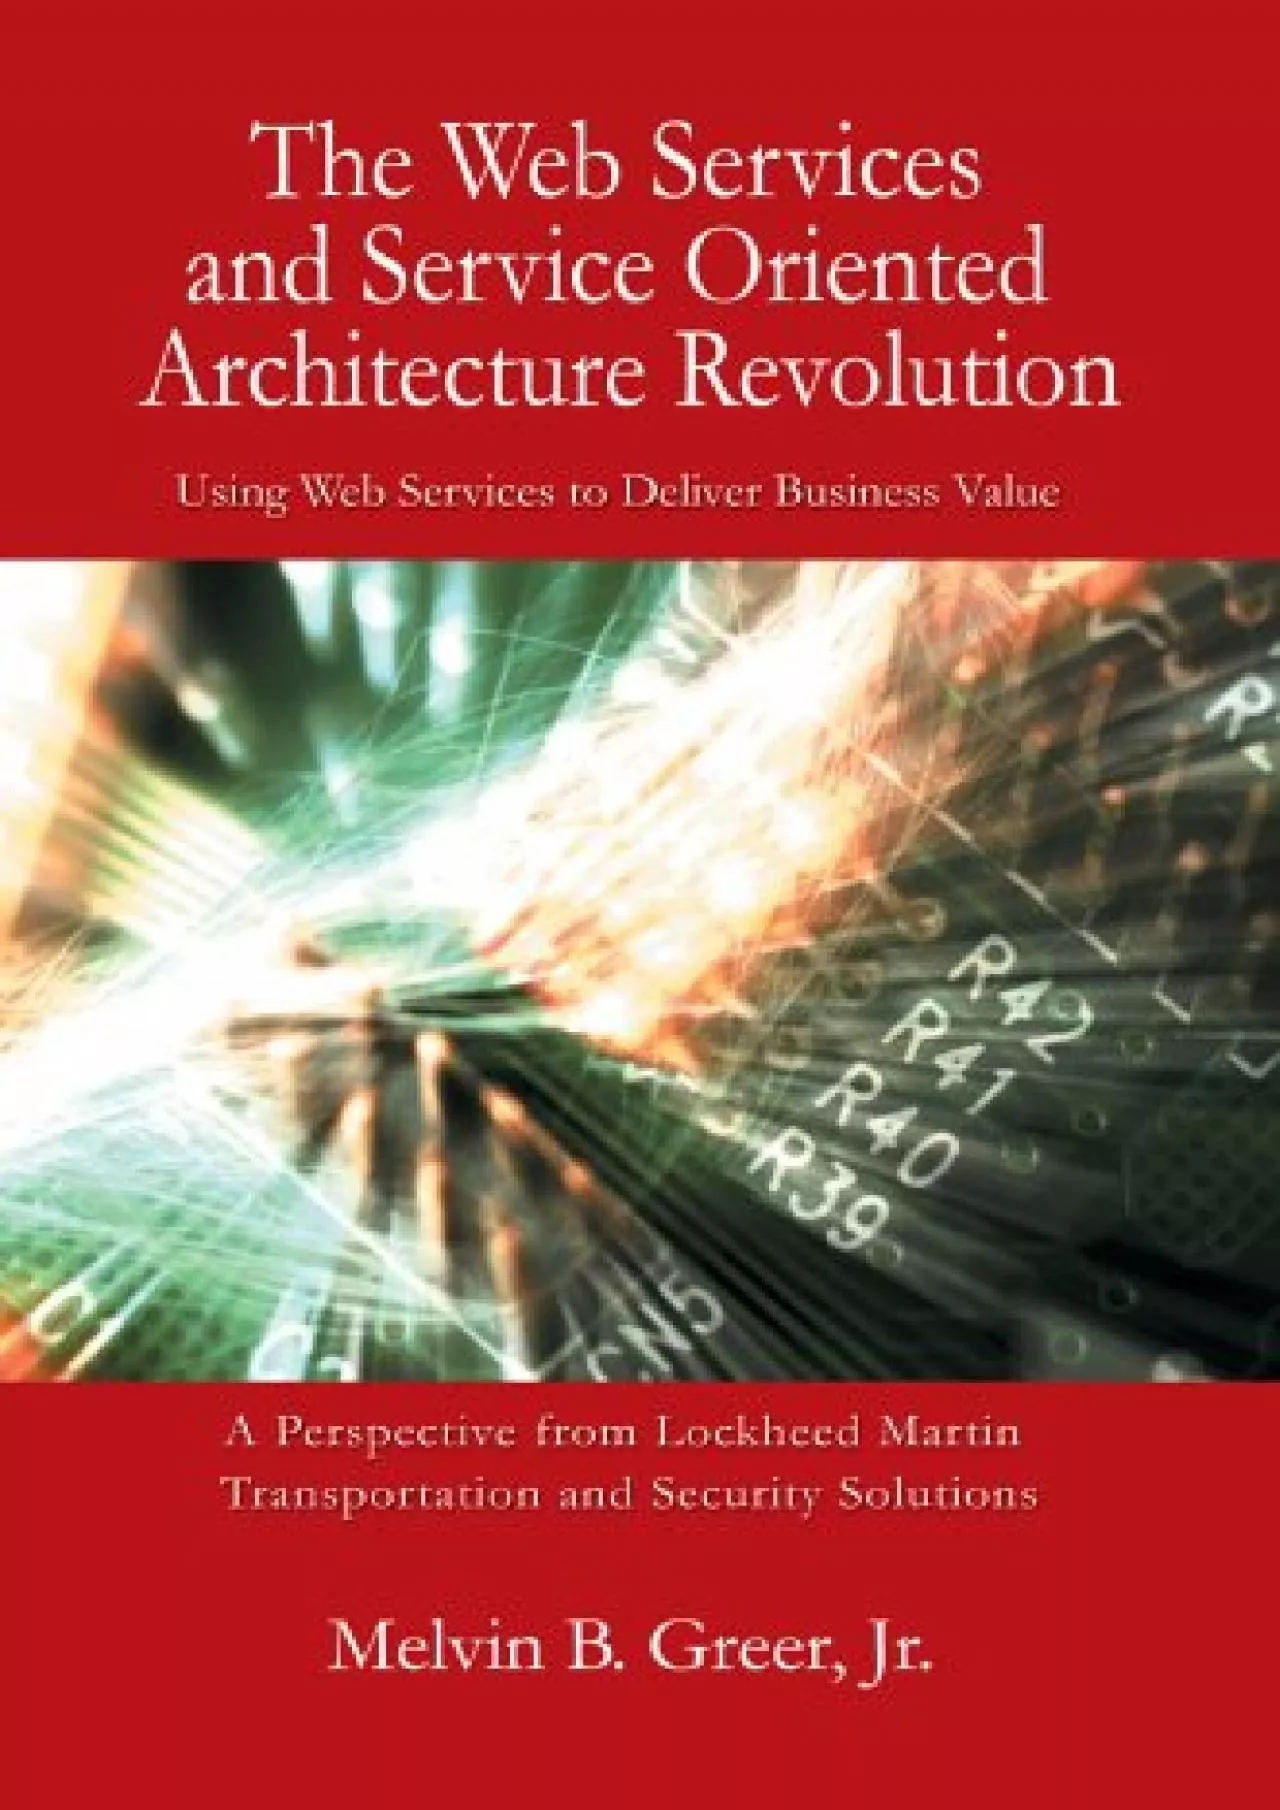 (DOWNLOAD)-The Web Services and Service Oriented Architecture Revolution: Using Web Services